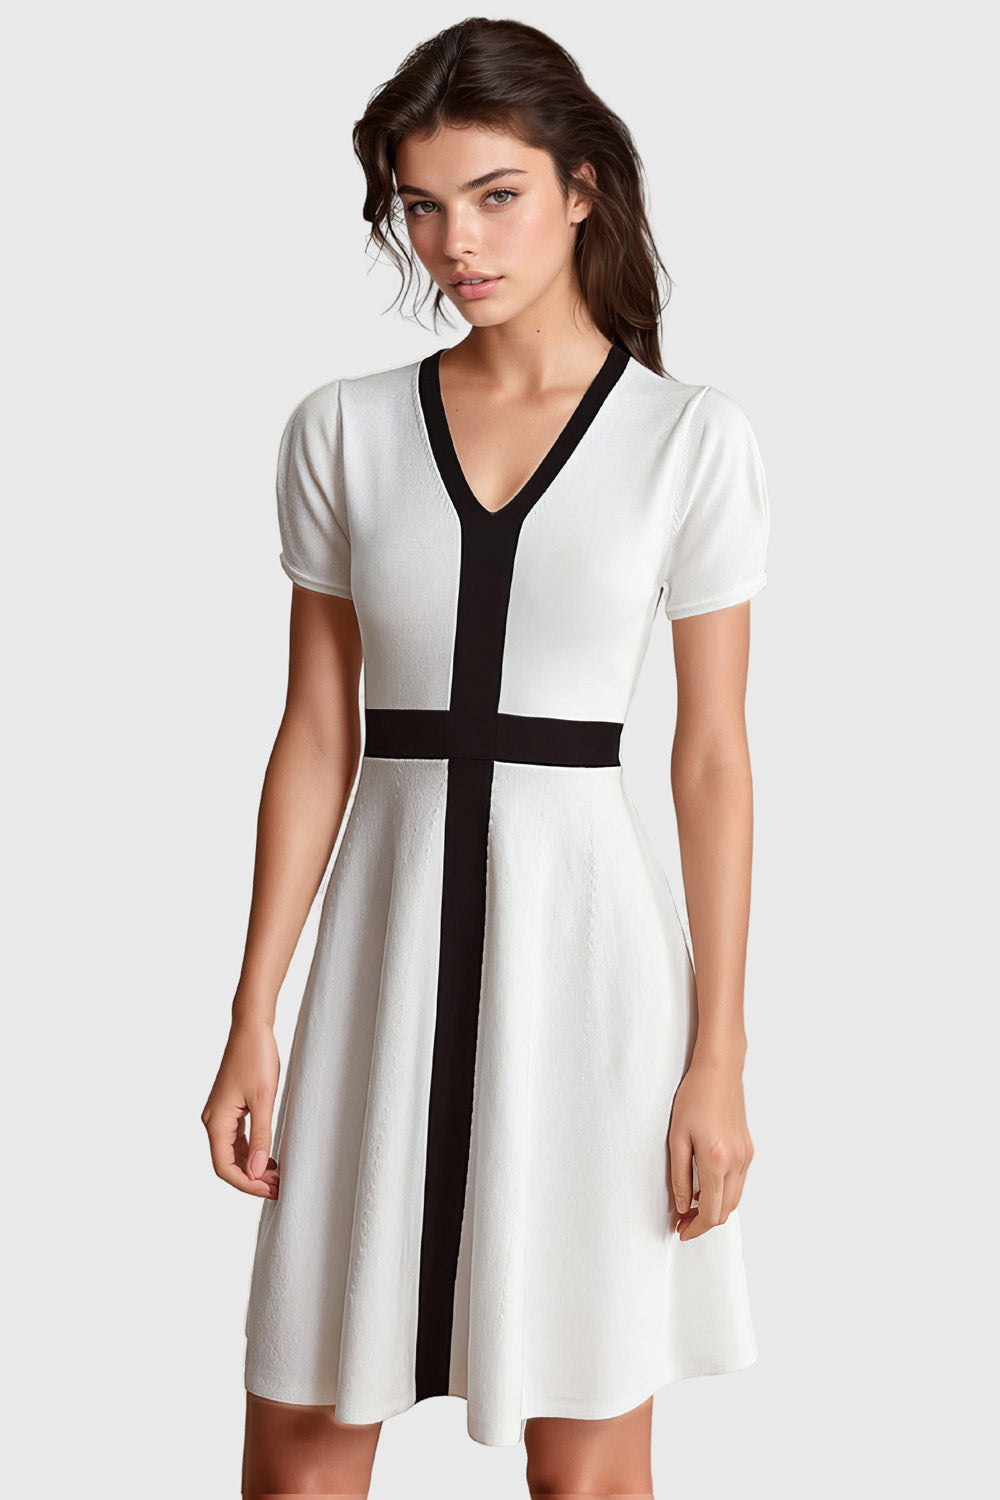 Contrast Dress with Short Sleeves - White